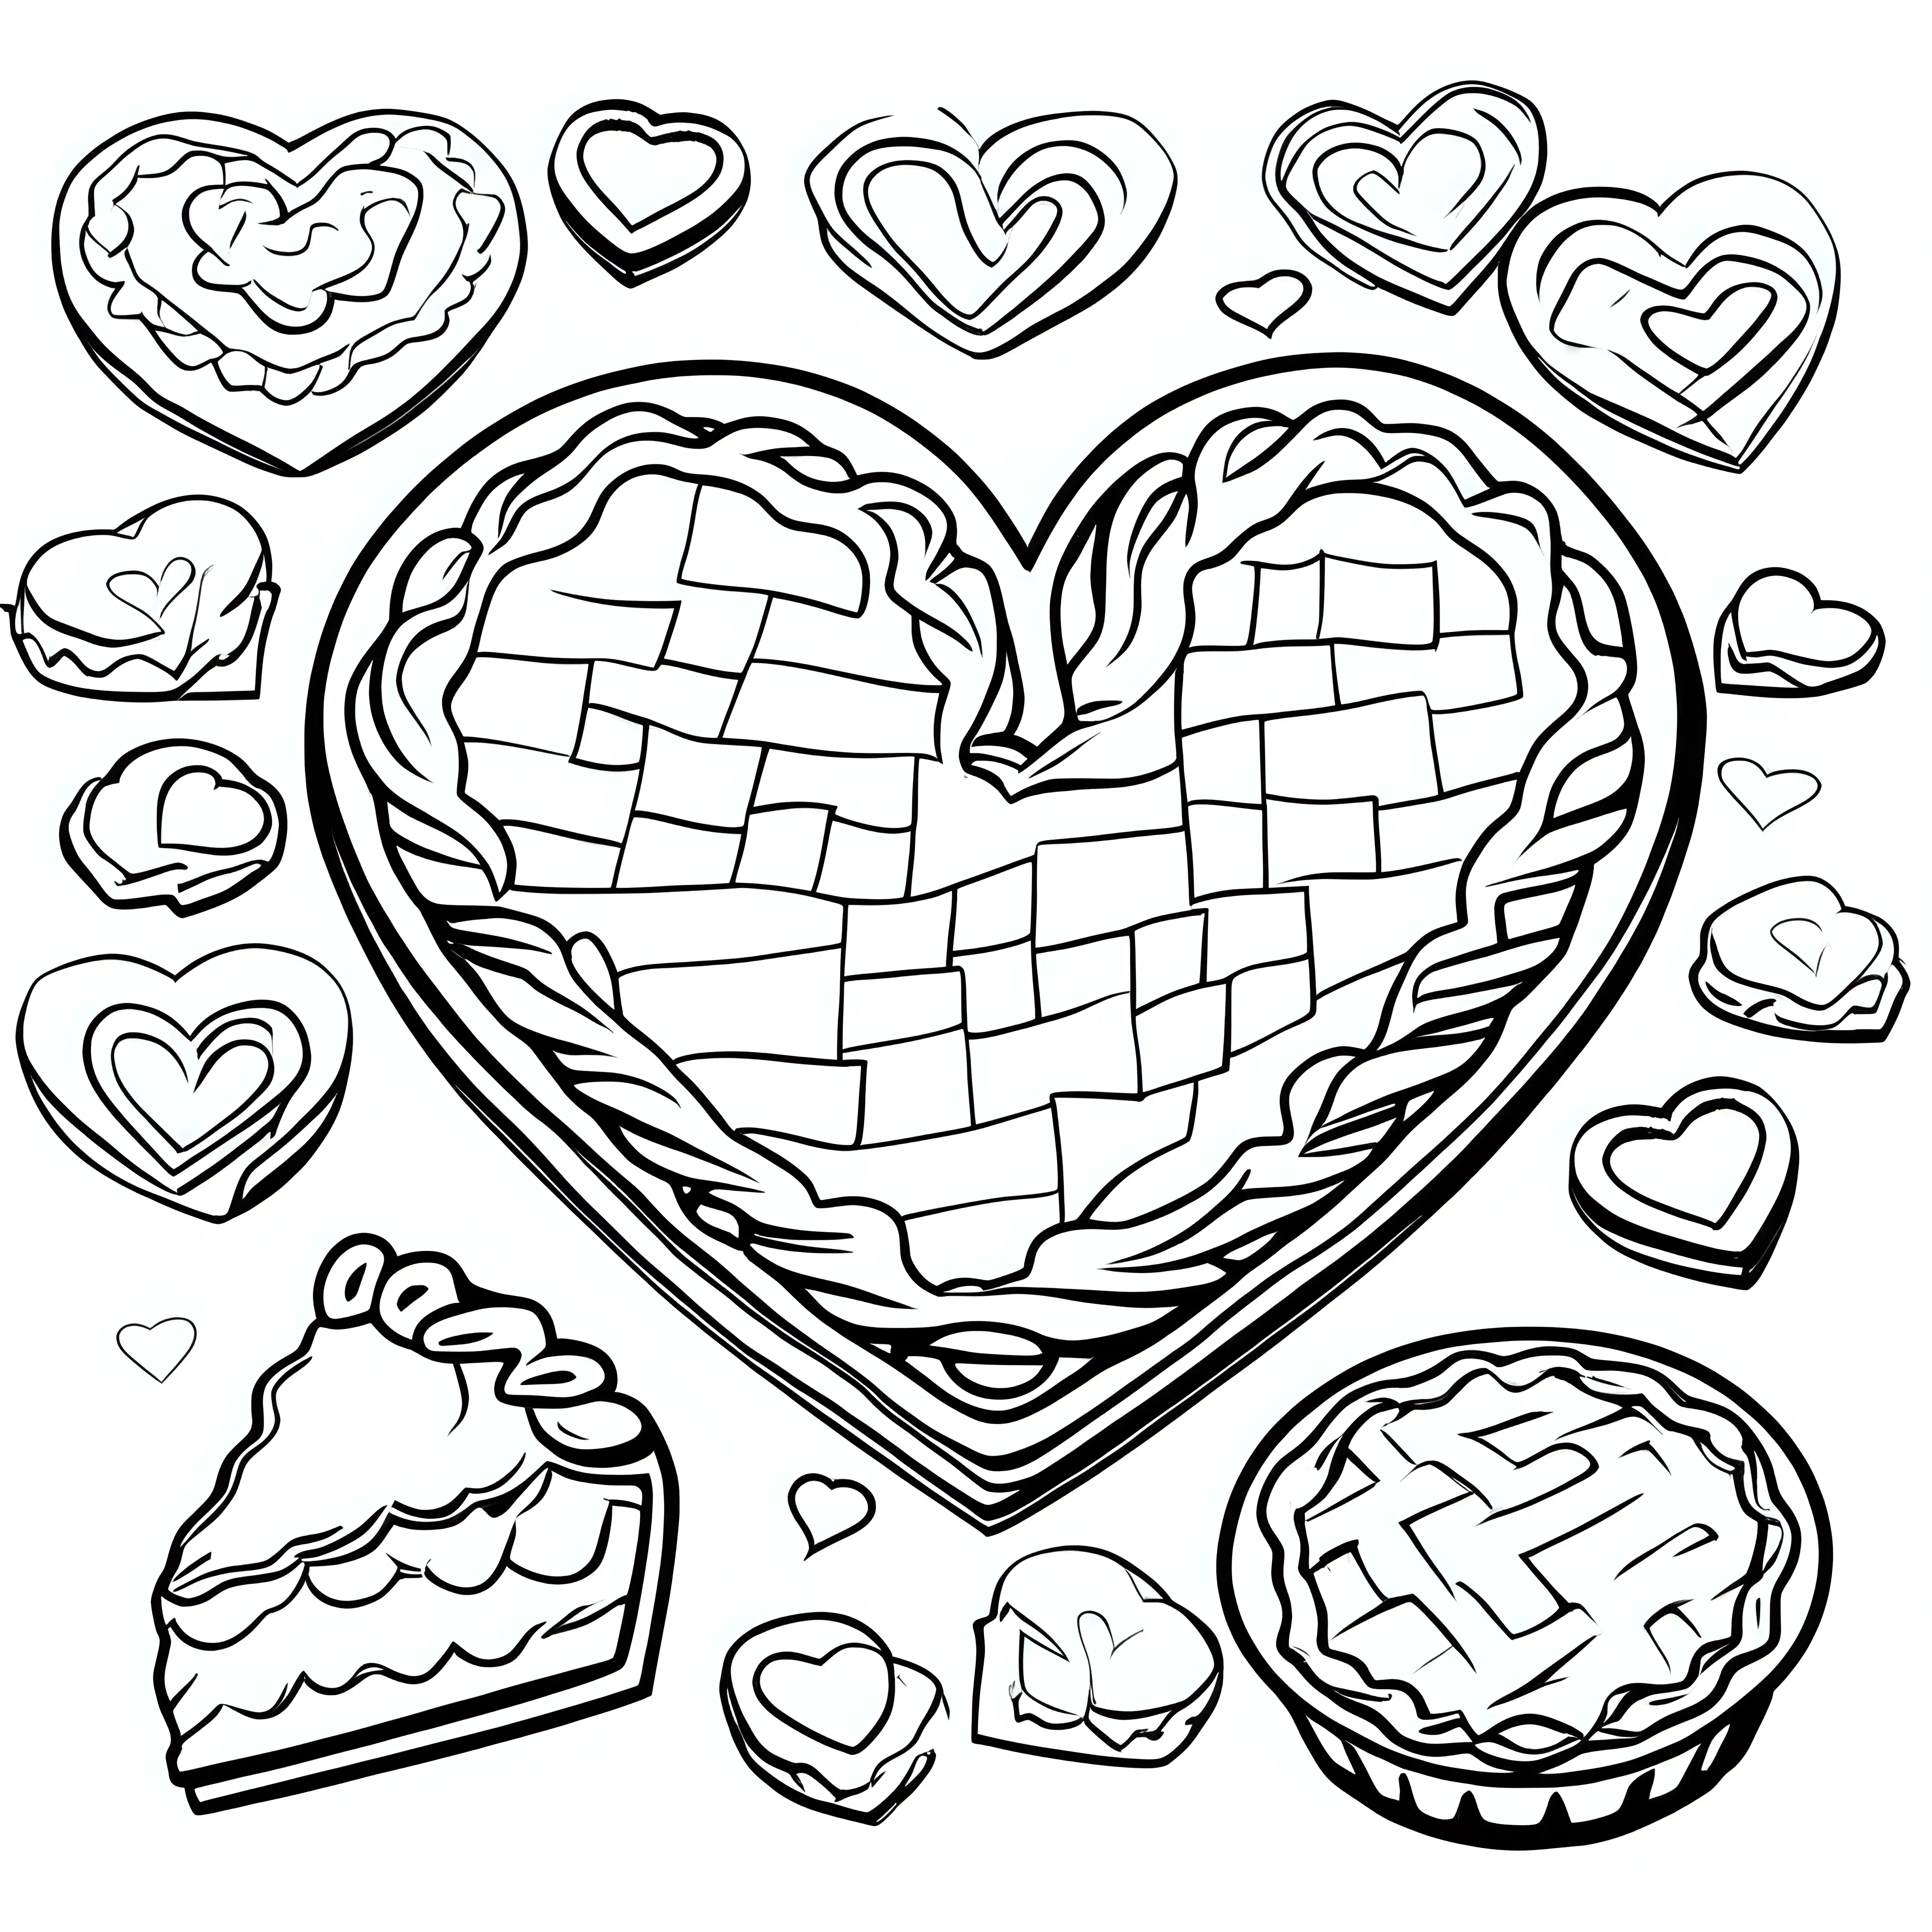 Valentines Day Pie Coloring Page Children Baking HeartShaped Pies